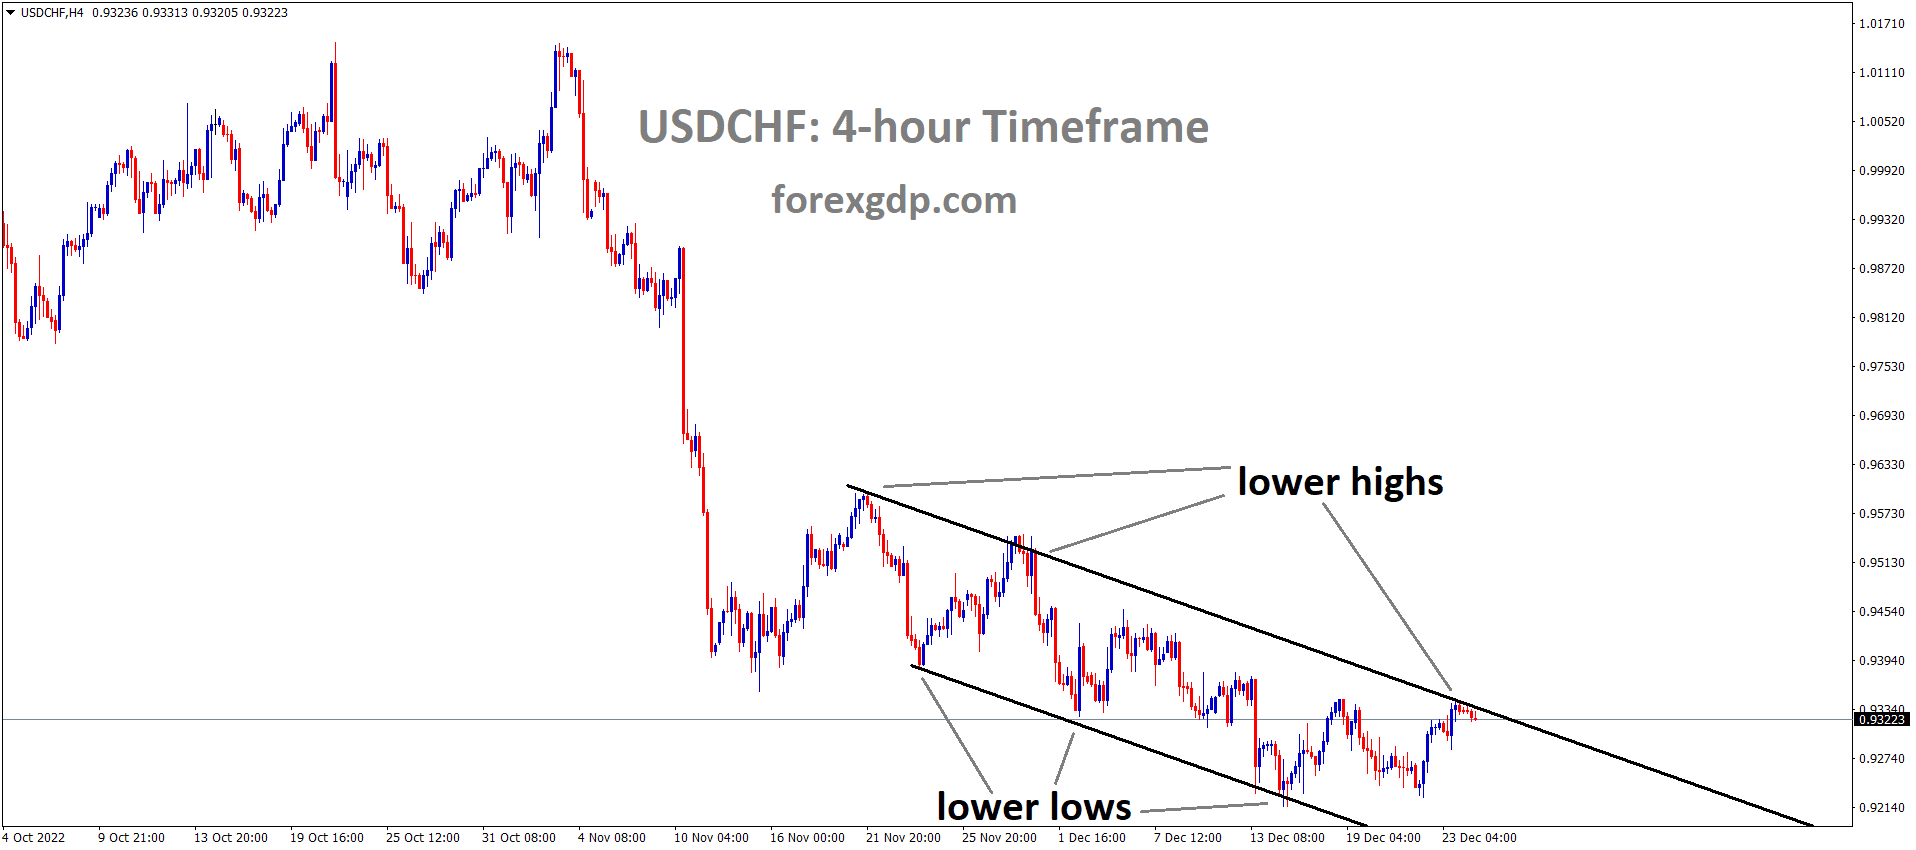 USDCHF is moving in the Descending channel and the market has fallen from the lower high area of the channel 5